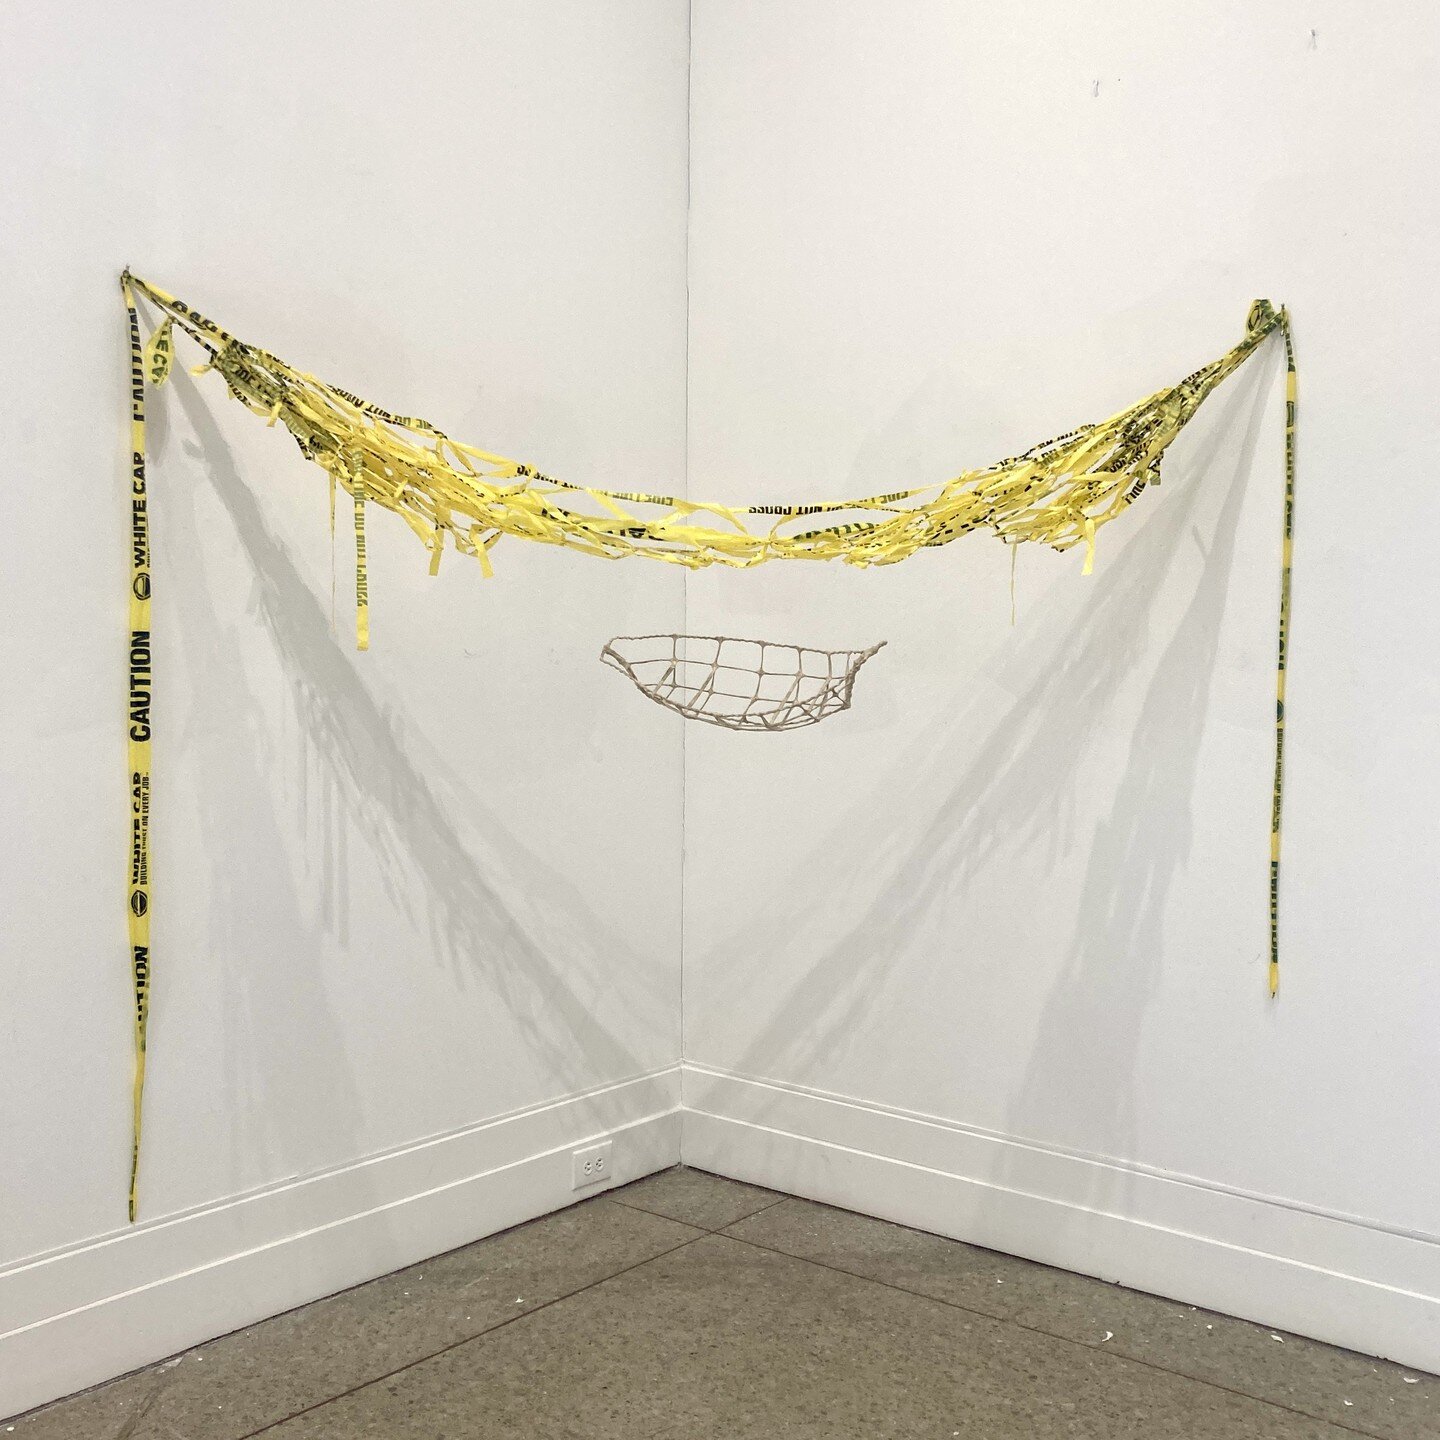 Dead in the Water, a new installation about ghost nets, rising sea waters, ocean plastics, indigenous fishing communities, and paying attention to warnings/signs. Overbeaten flax paper shrunk over steel wire armature, netted reused plastic caution ta